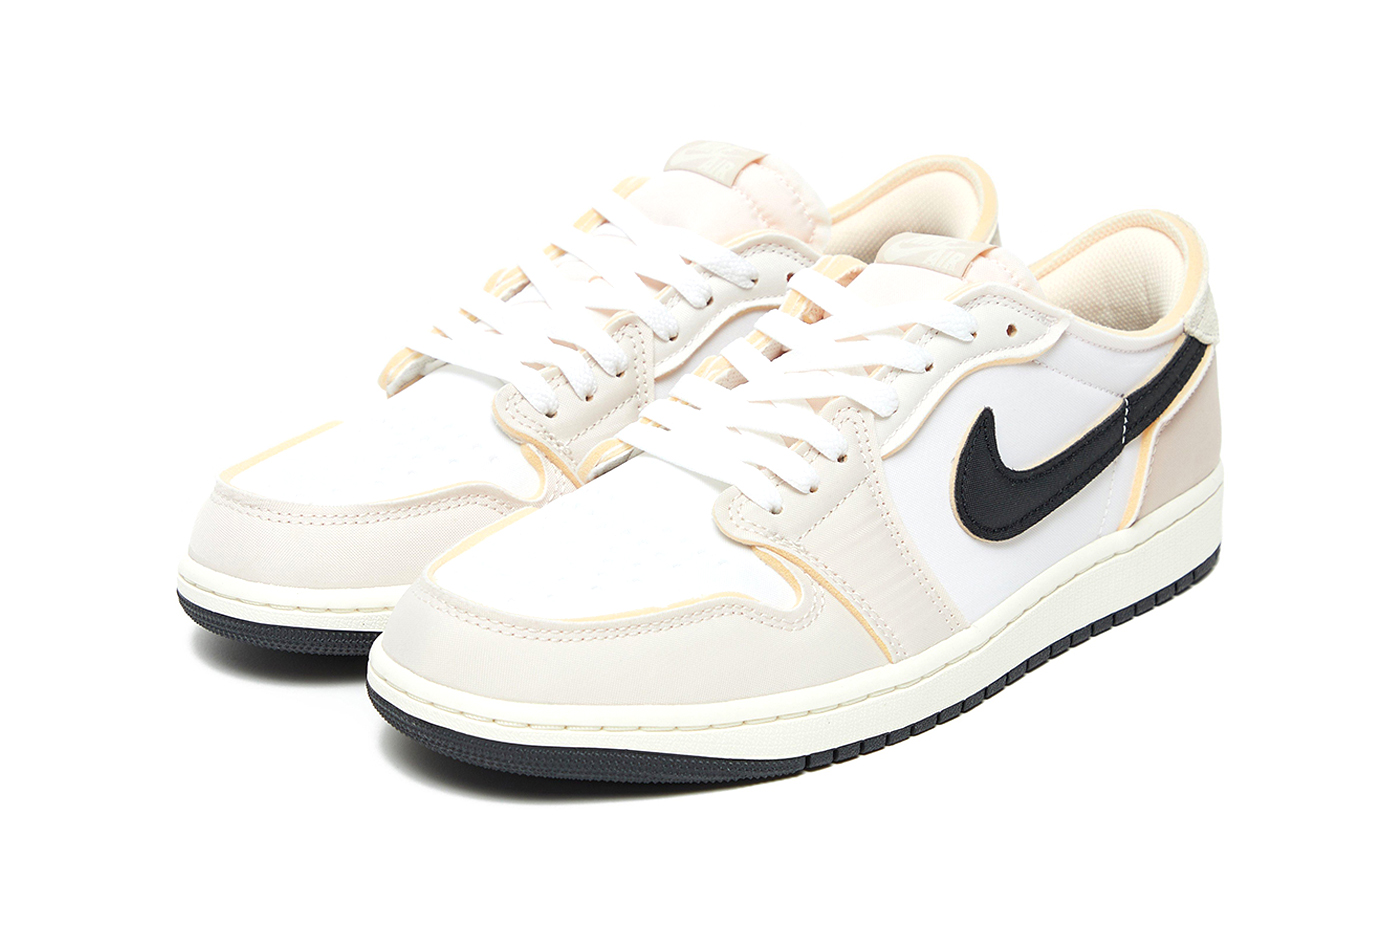 lateral side of Air Jordan 1 Low 'Coconut Milk' sneakers featuring neutral-toned design and enhanced water resistance.